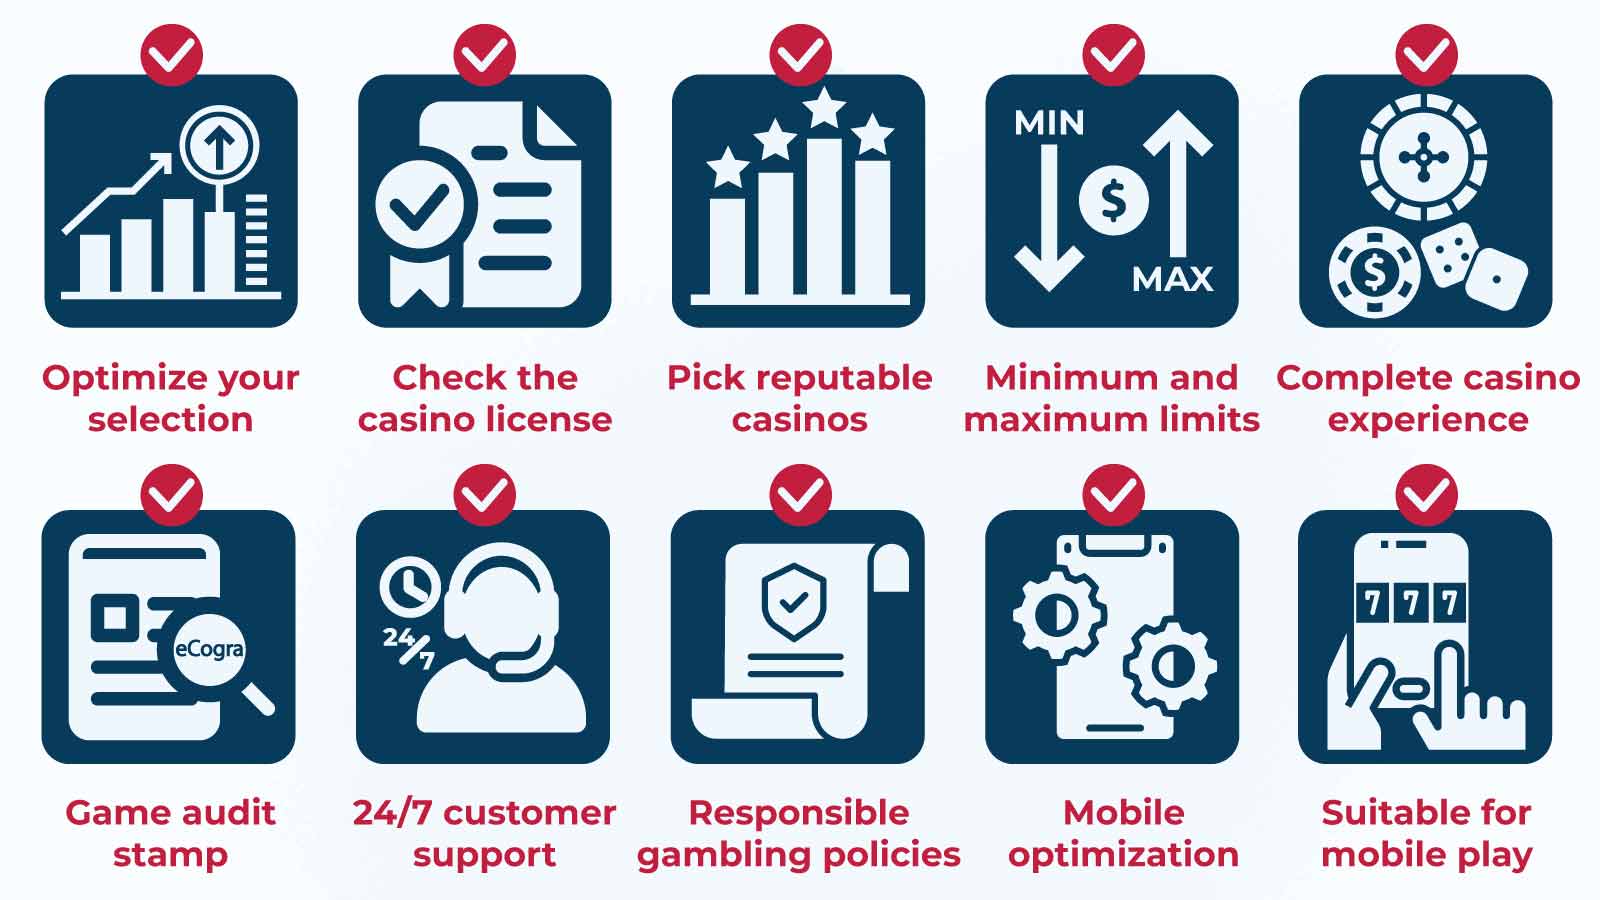 How to pick the best Visa casinos in Canada